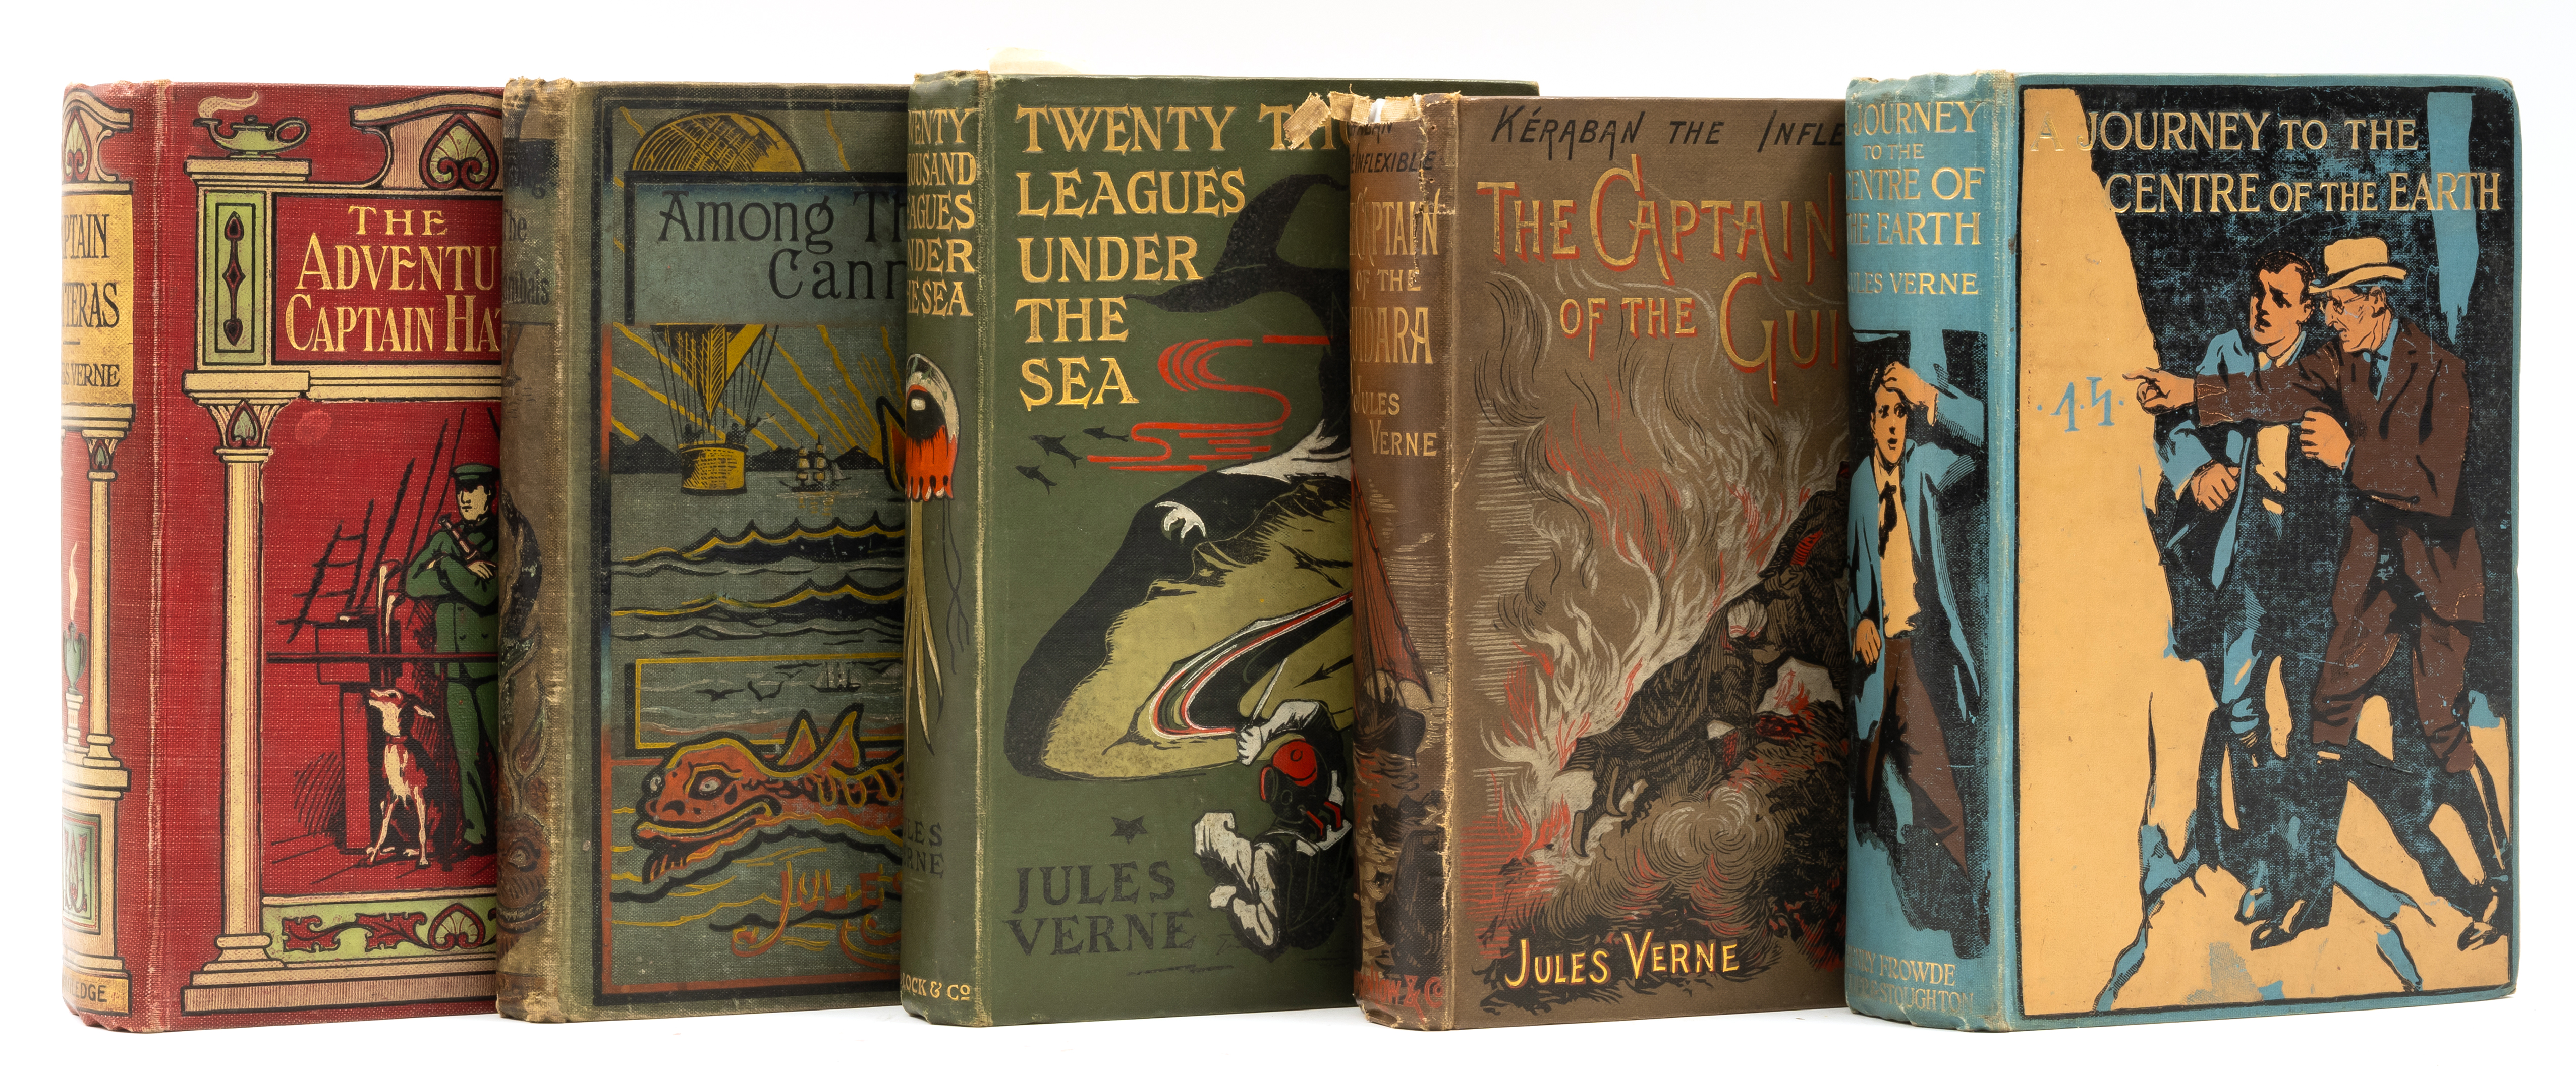 Verne (Jules) Twenty Thousand Leagues Under the Sea, 1902 & others, early reprints by Verne in pi...